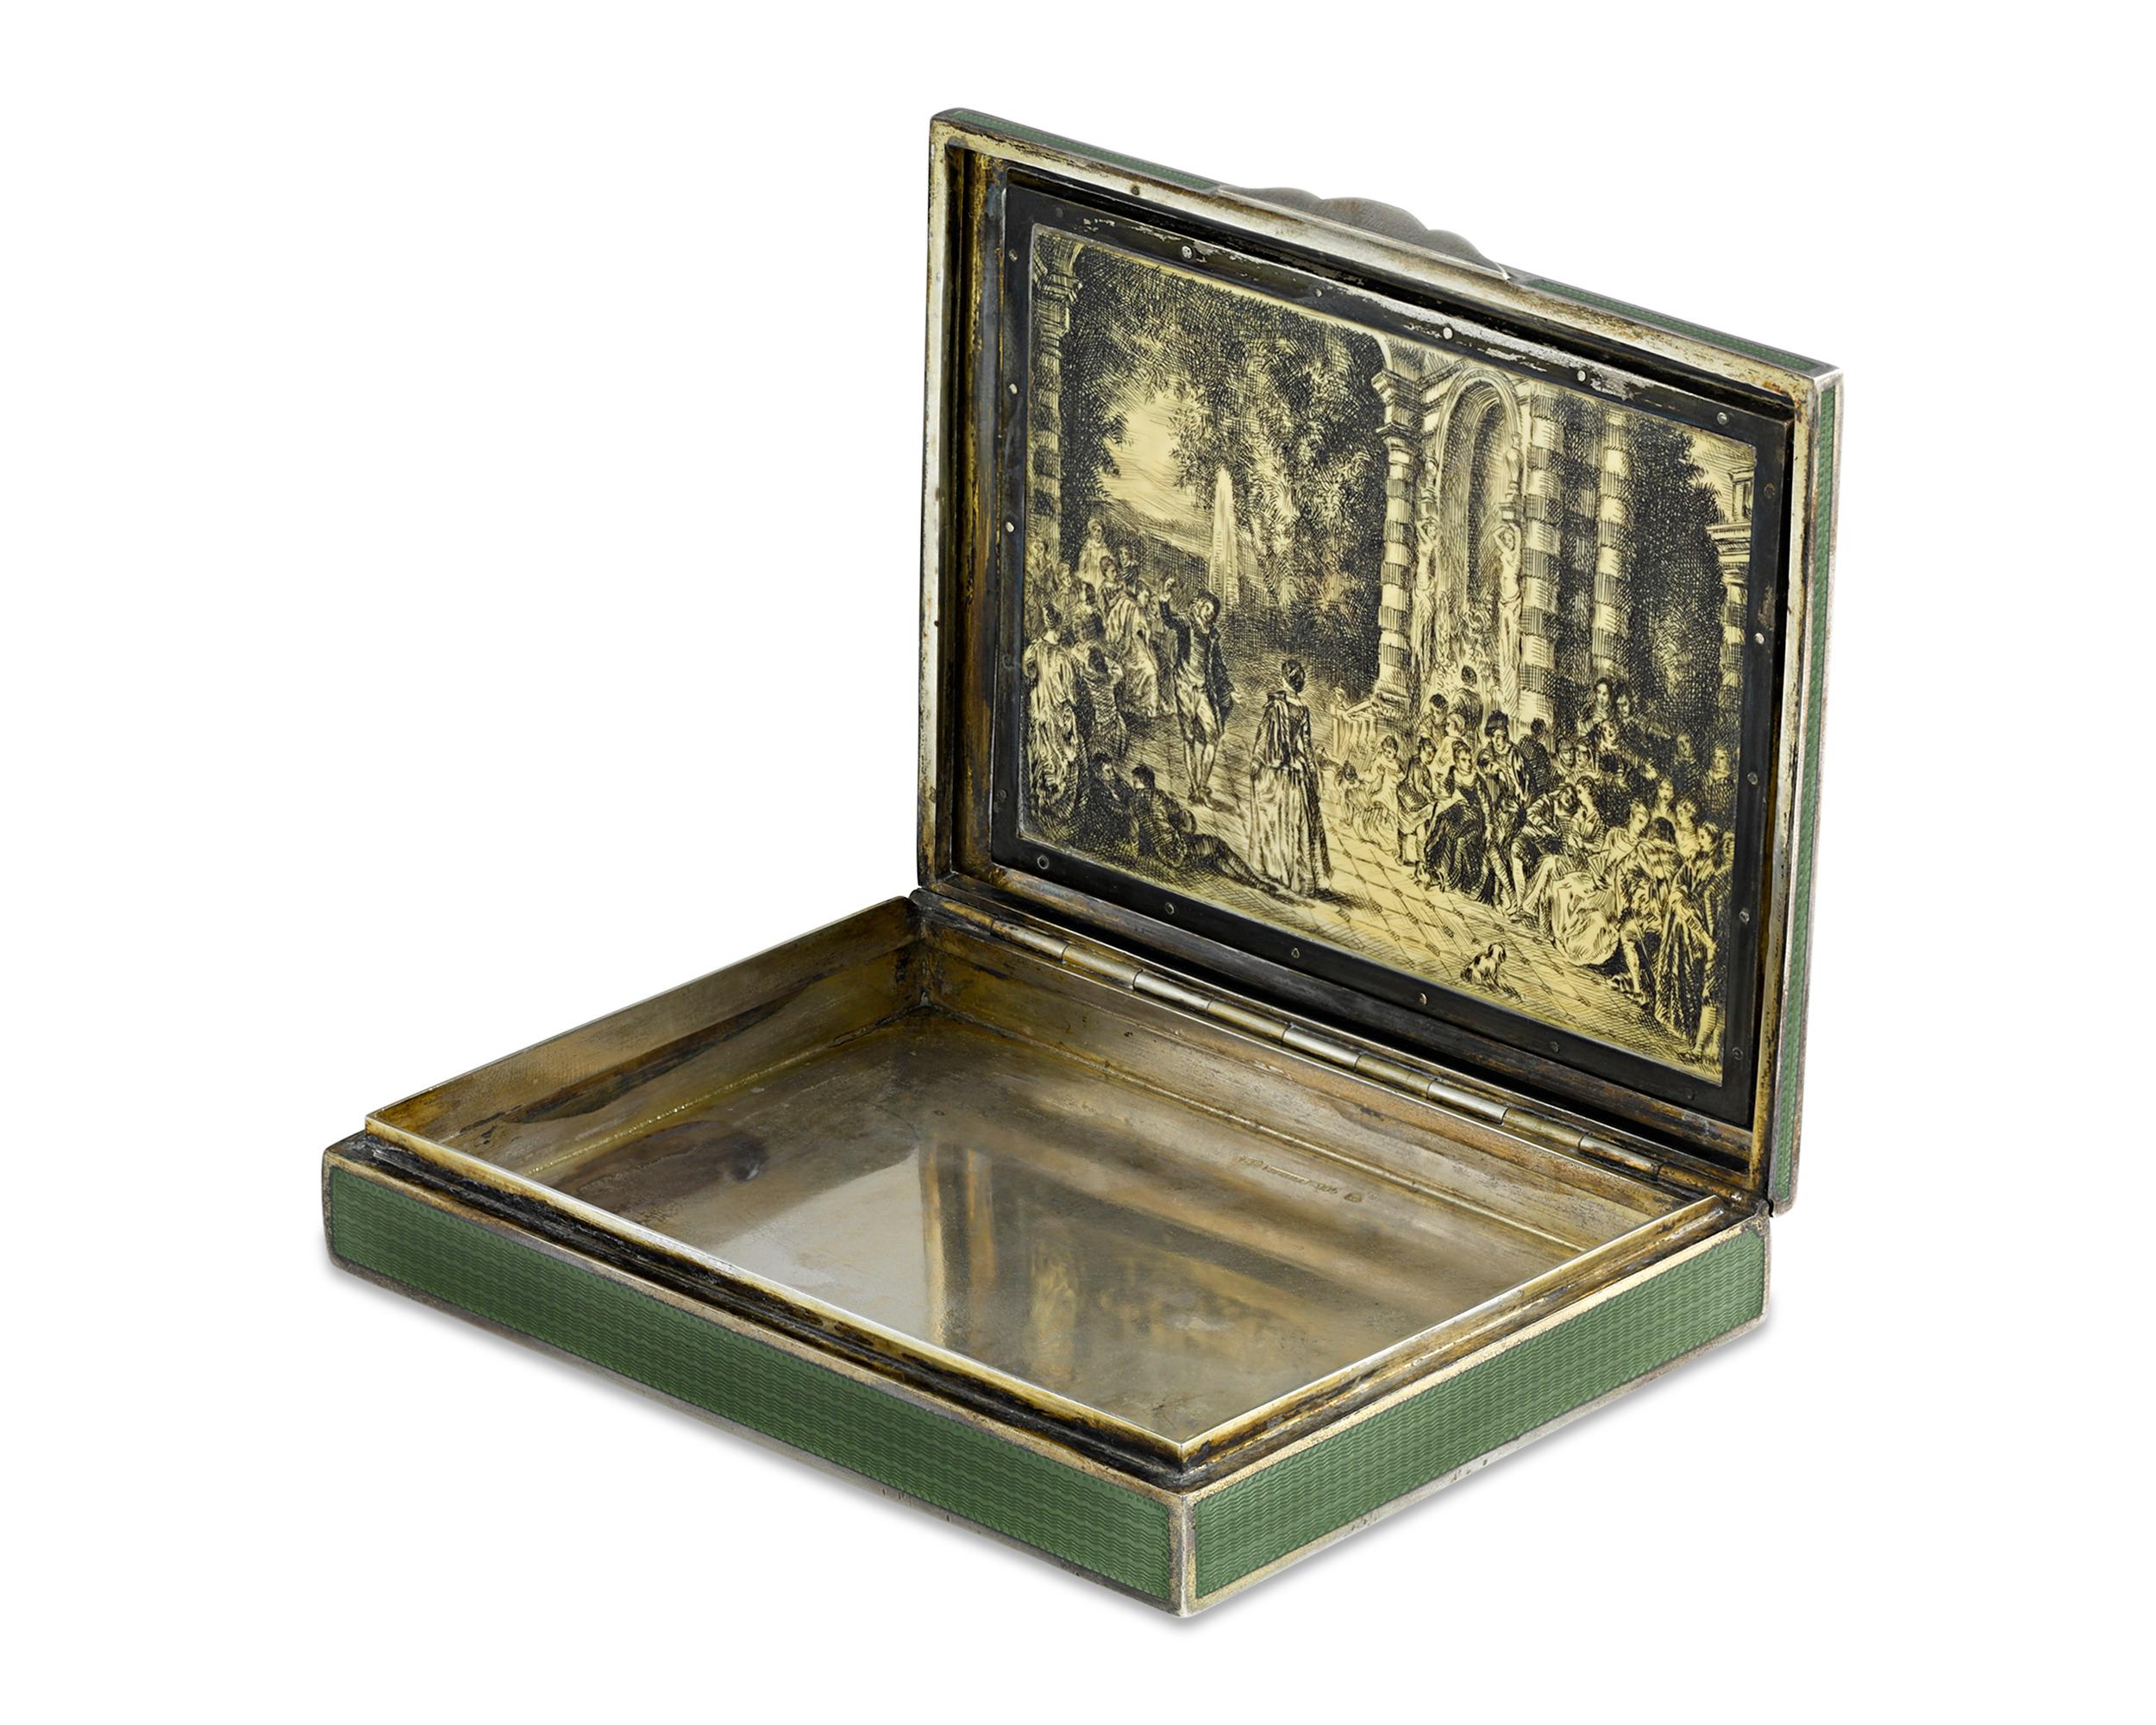 Crafted of fine 935 fineness of silver, this Viennese snuffbox is a testament to the country's time-honored and renowned tradition of enameling. The lid is graced by an intricate pastoral scene surrounded by a border of delicately hand painted